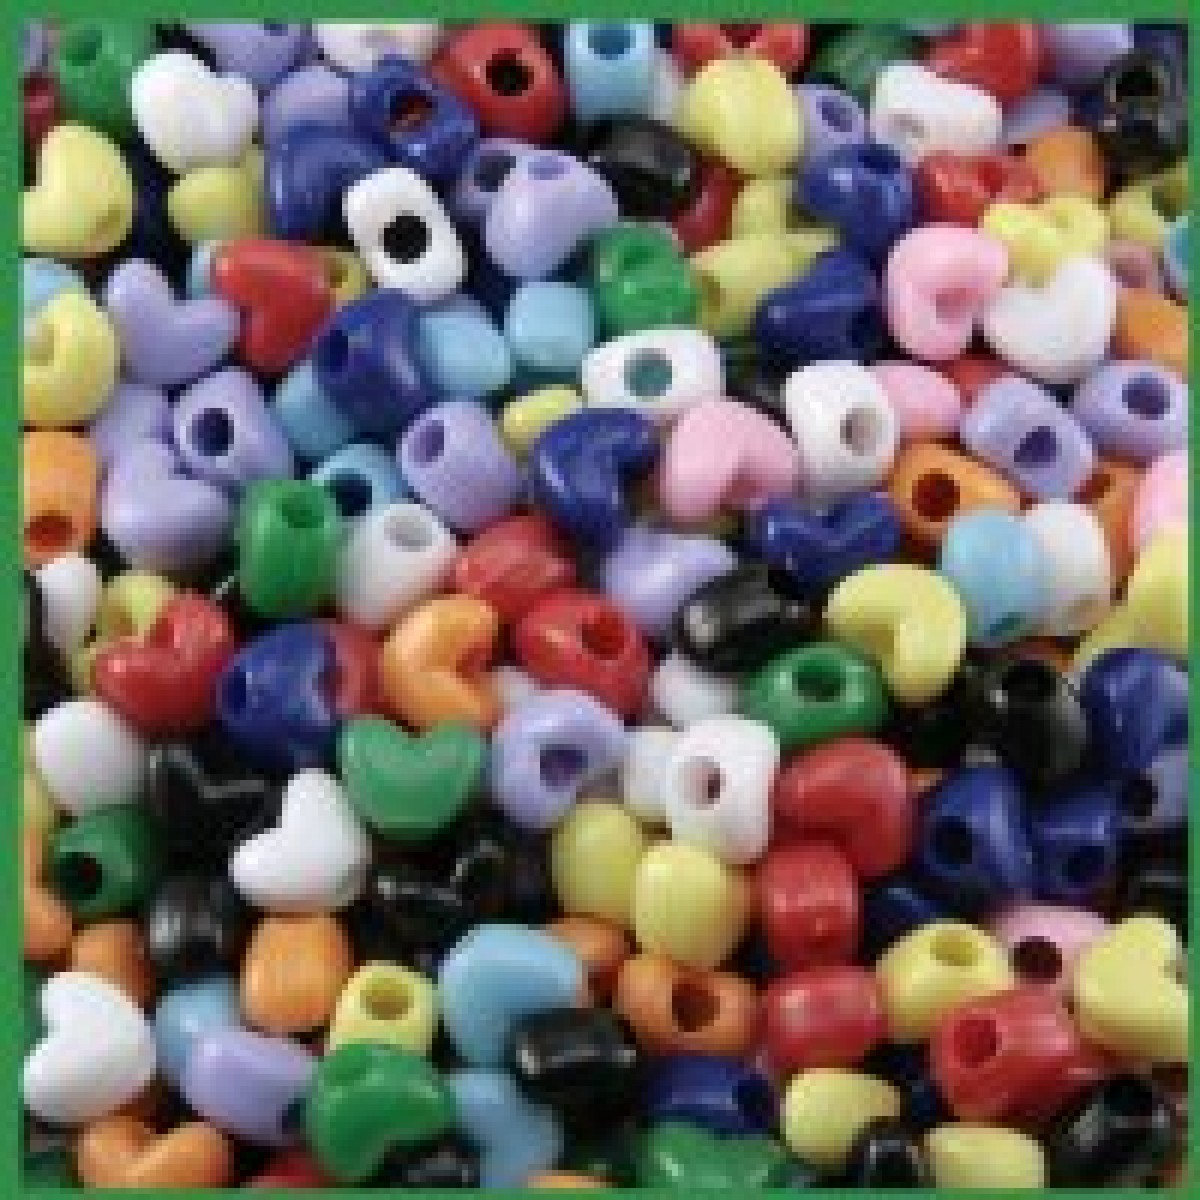 Pony Beads Heart Shape - Beads and Findings - Fun Craft Activities